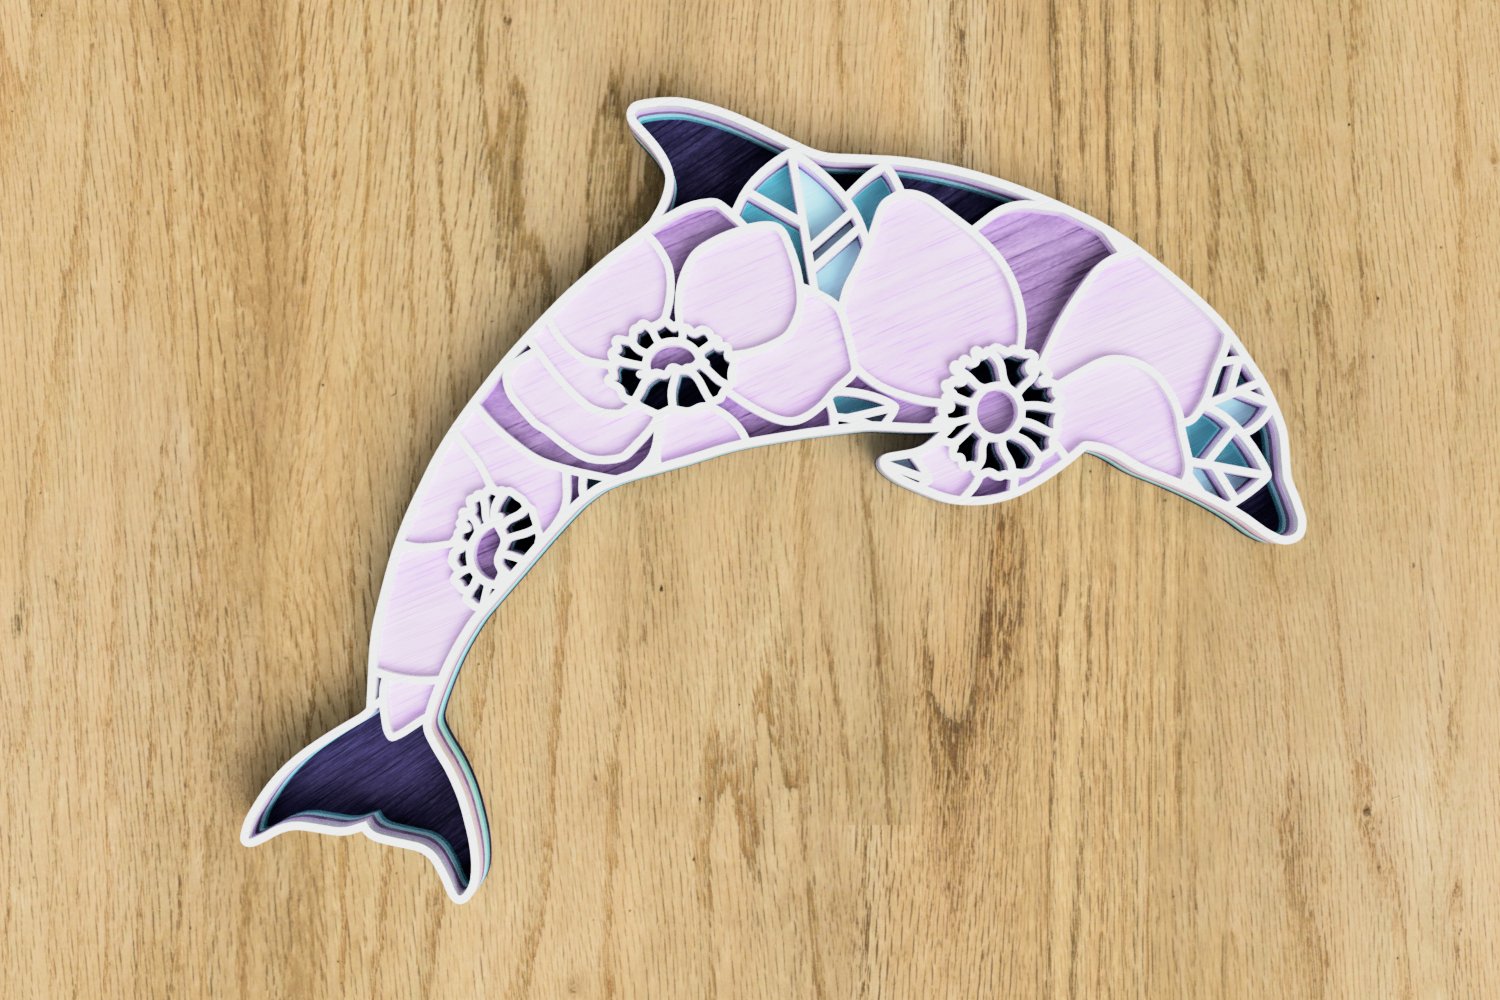 Paper cut of a dolphin on a wooden surface.